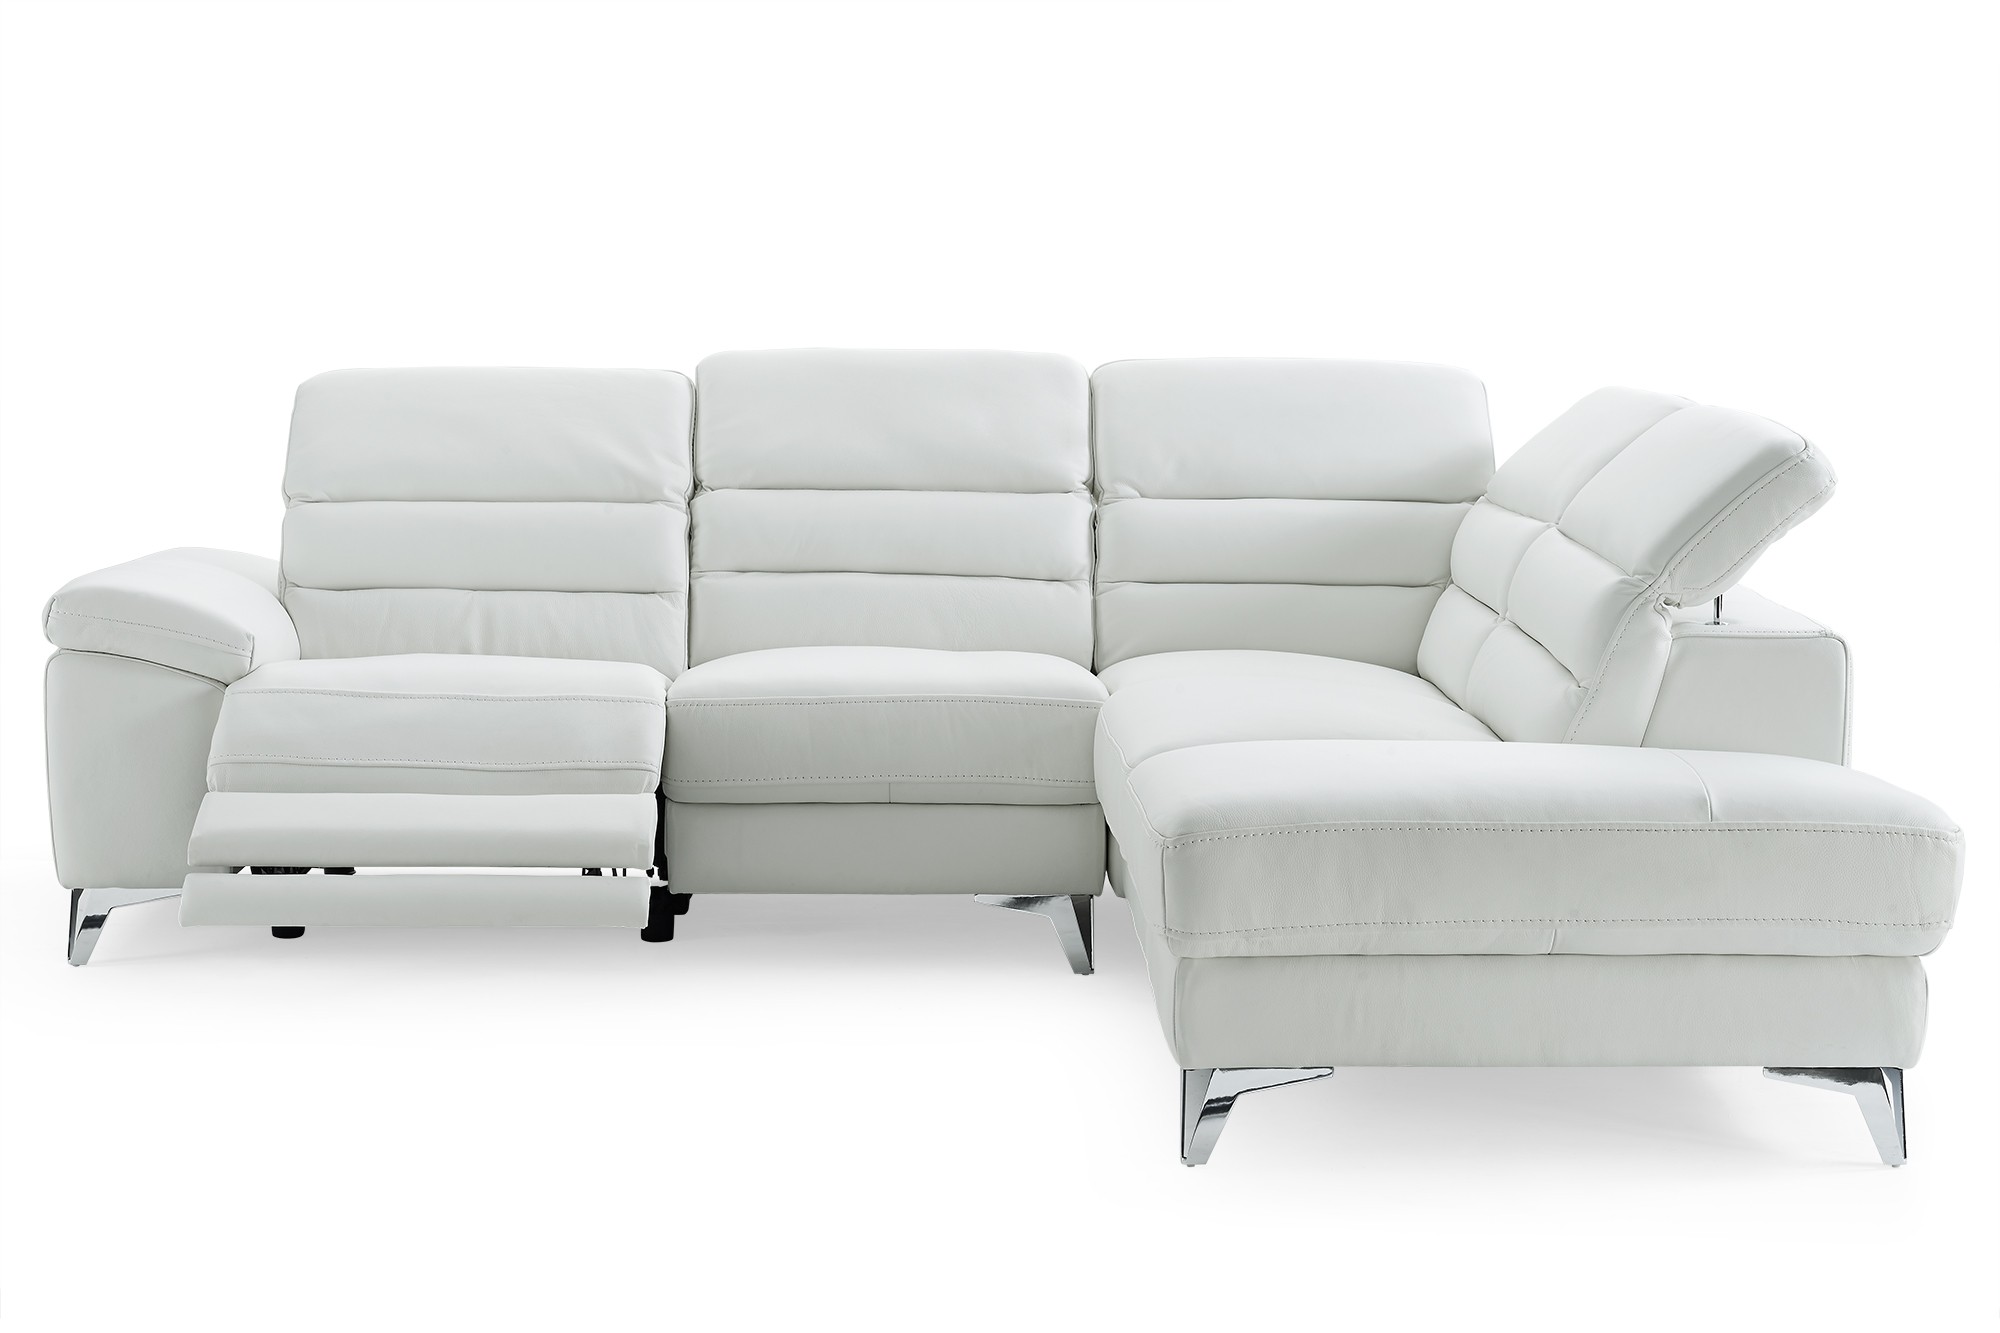 Sectional Chaise On Right When Facing White Top Grain Italian Leather